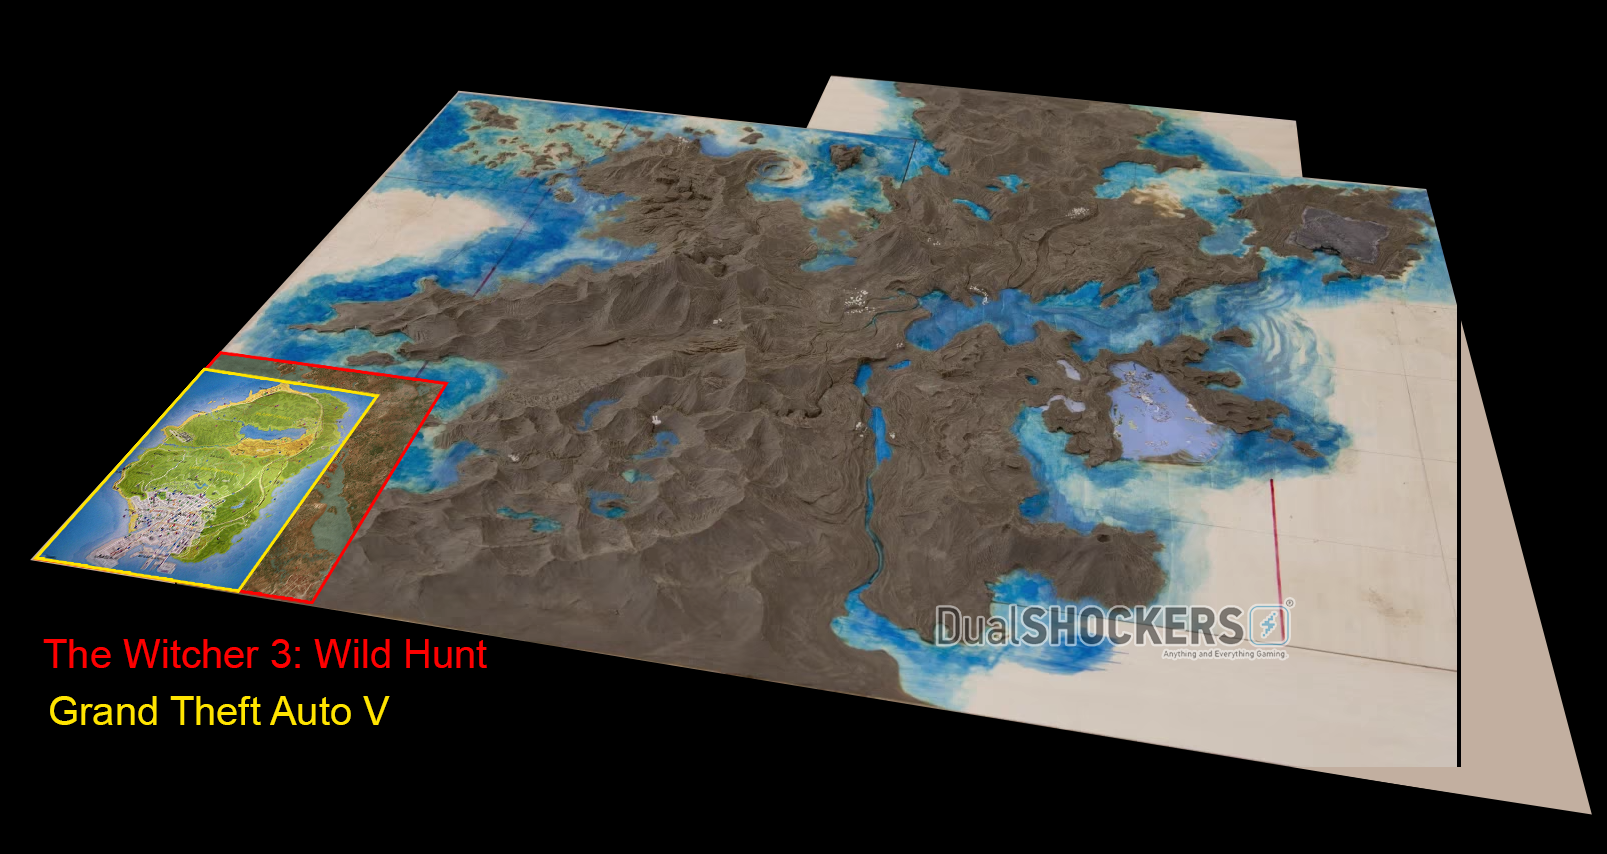 Final Fantasy XV map size revealed, it's about ten times as big as The witcher 3 and GTAV